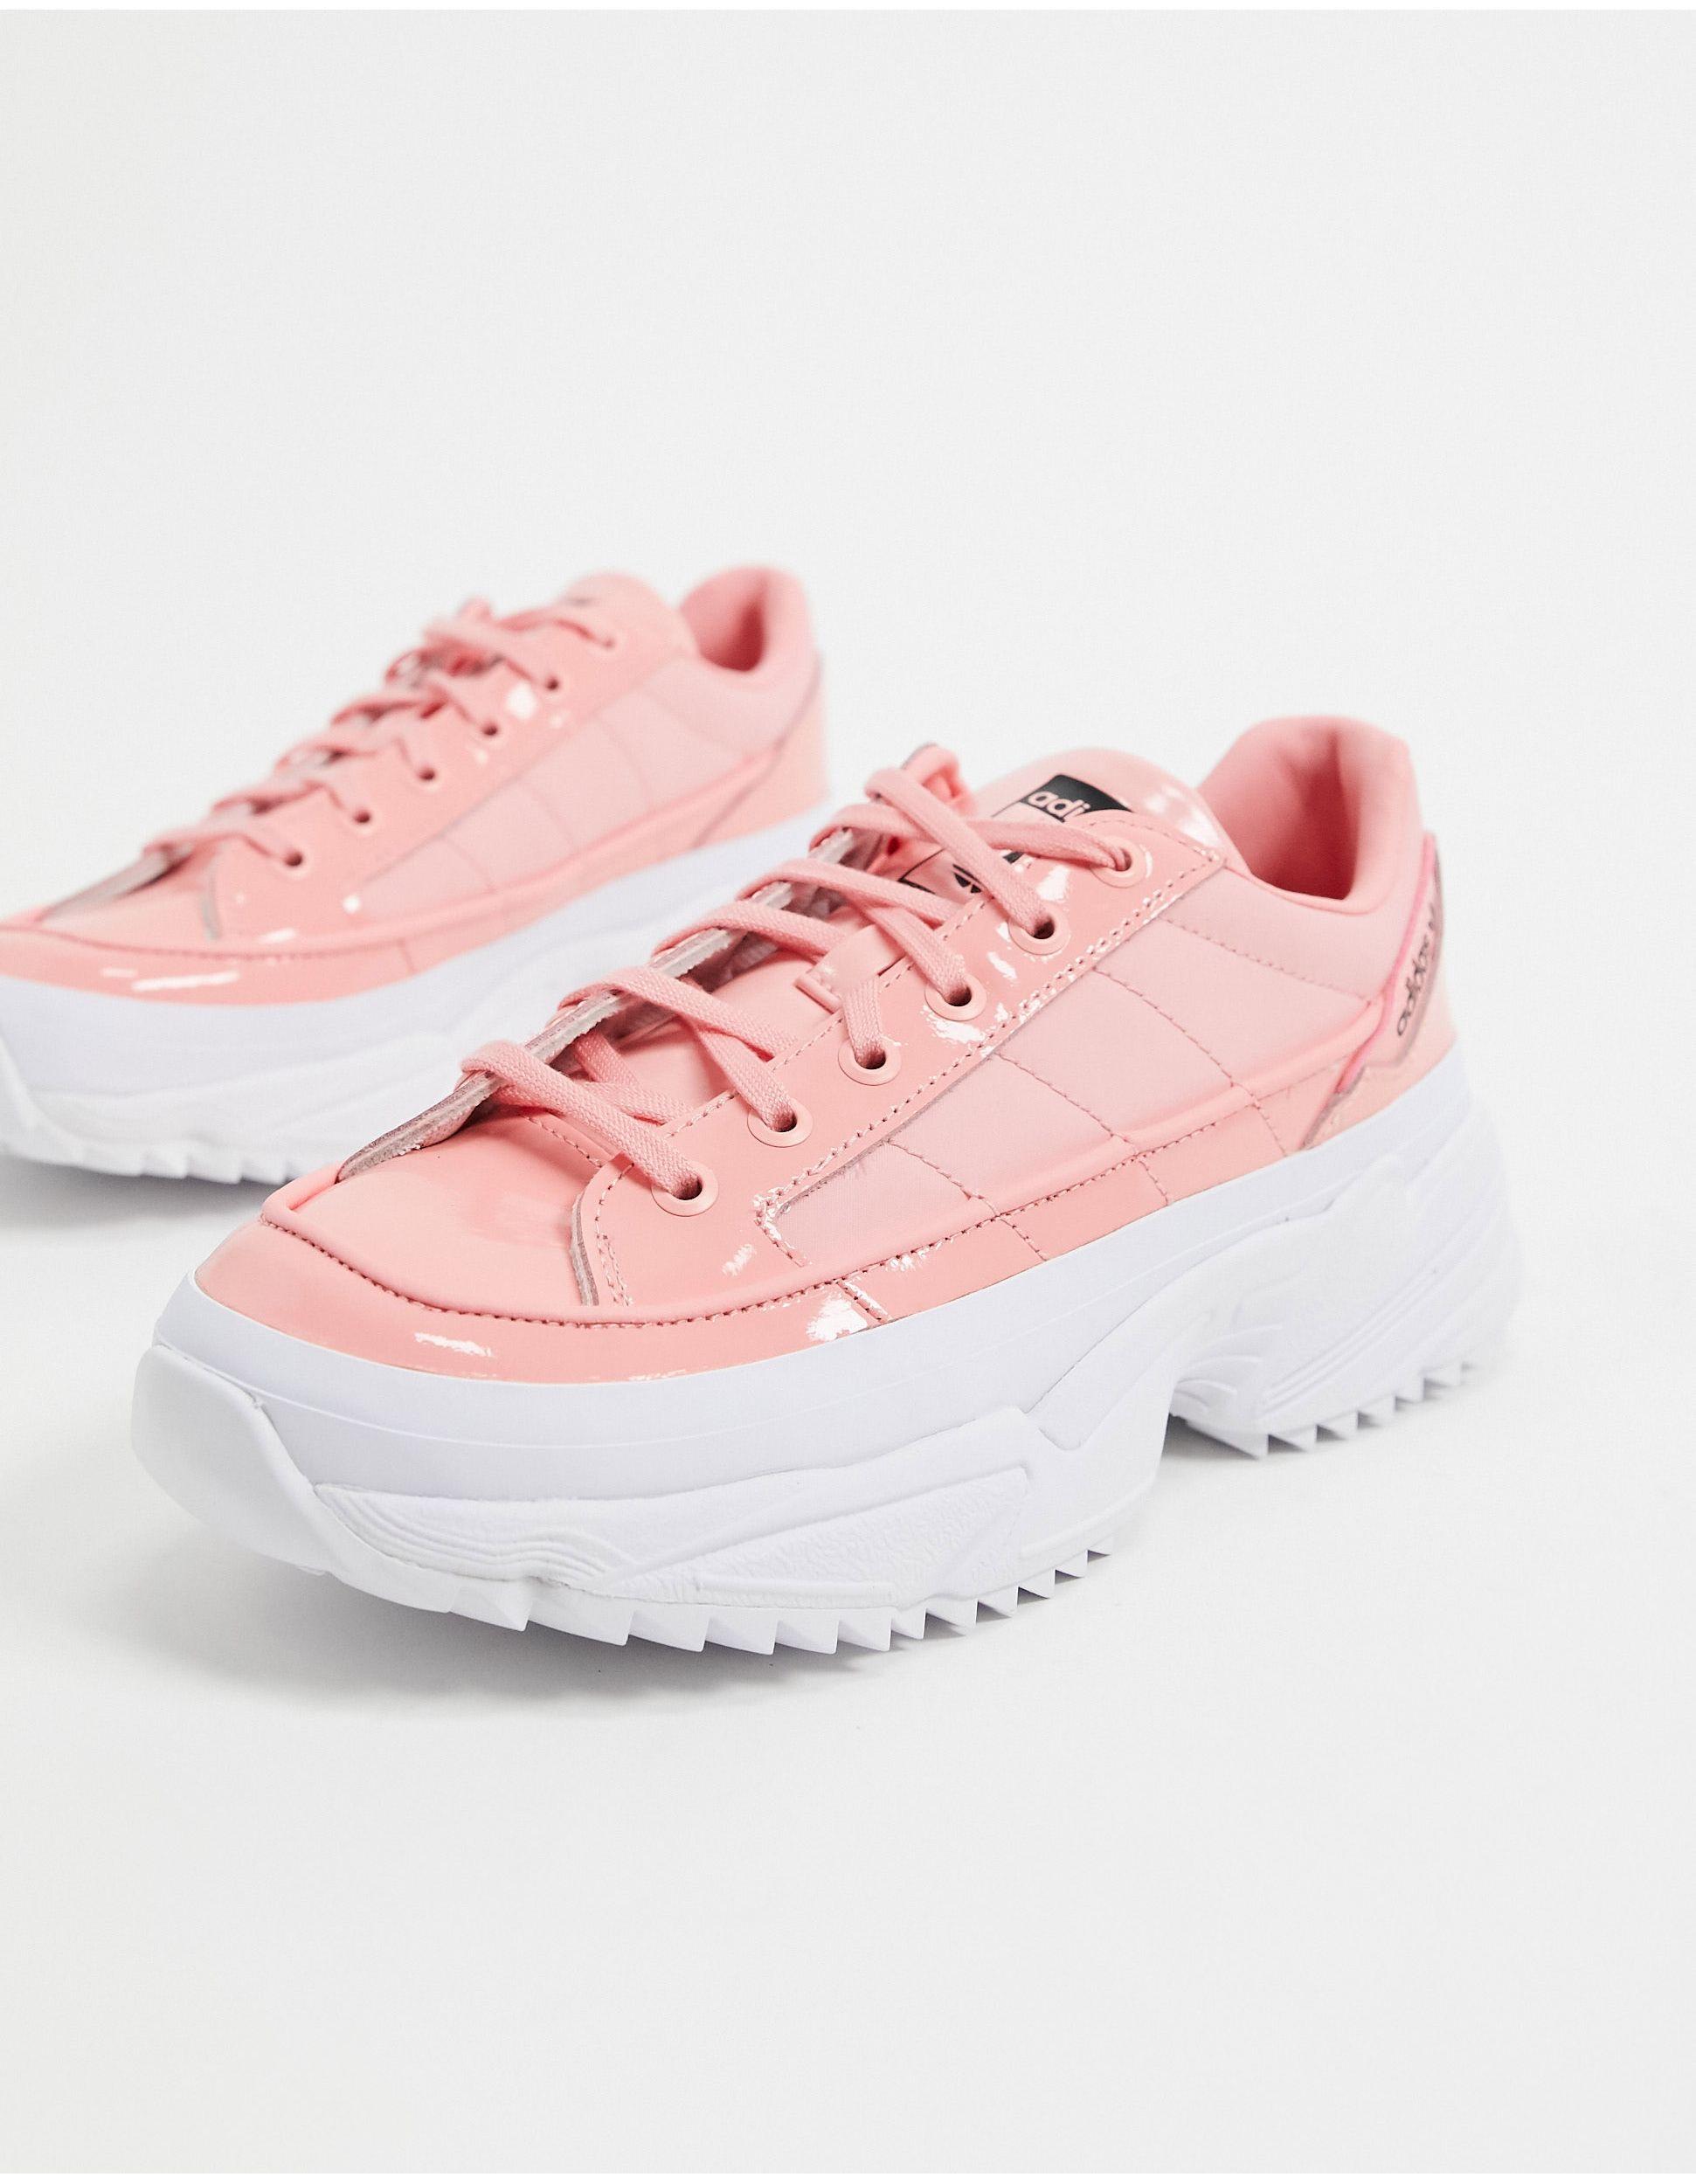 adidas Originals Synthetic Kiellor Shoes in Baby Pink (Pink) - Save 58% -  Lyst